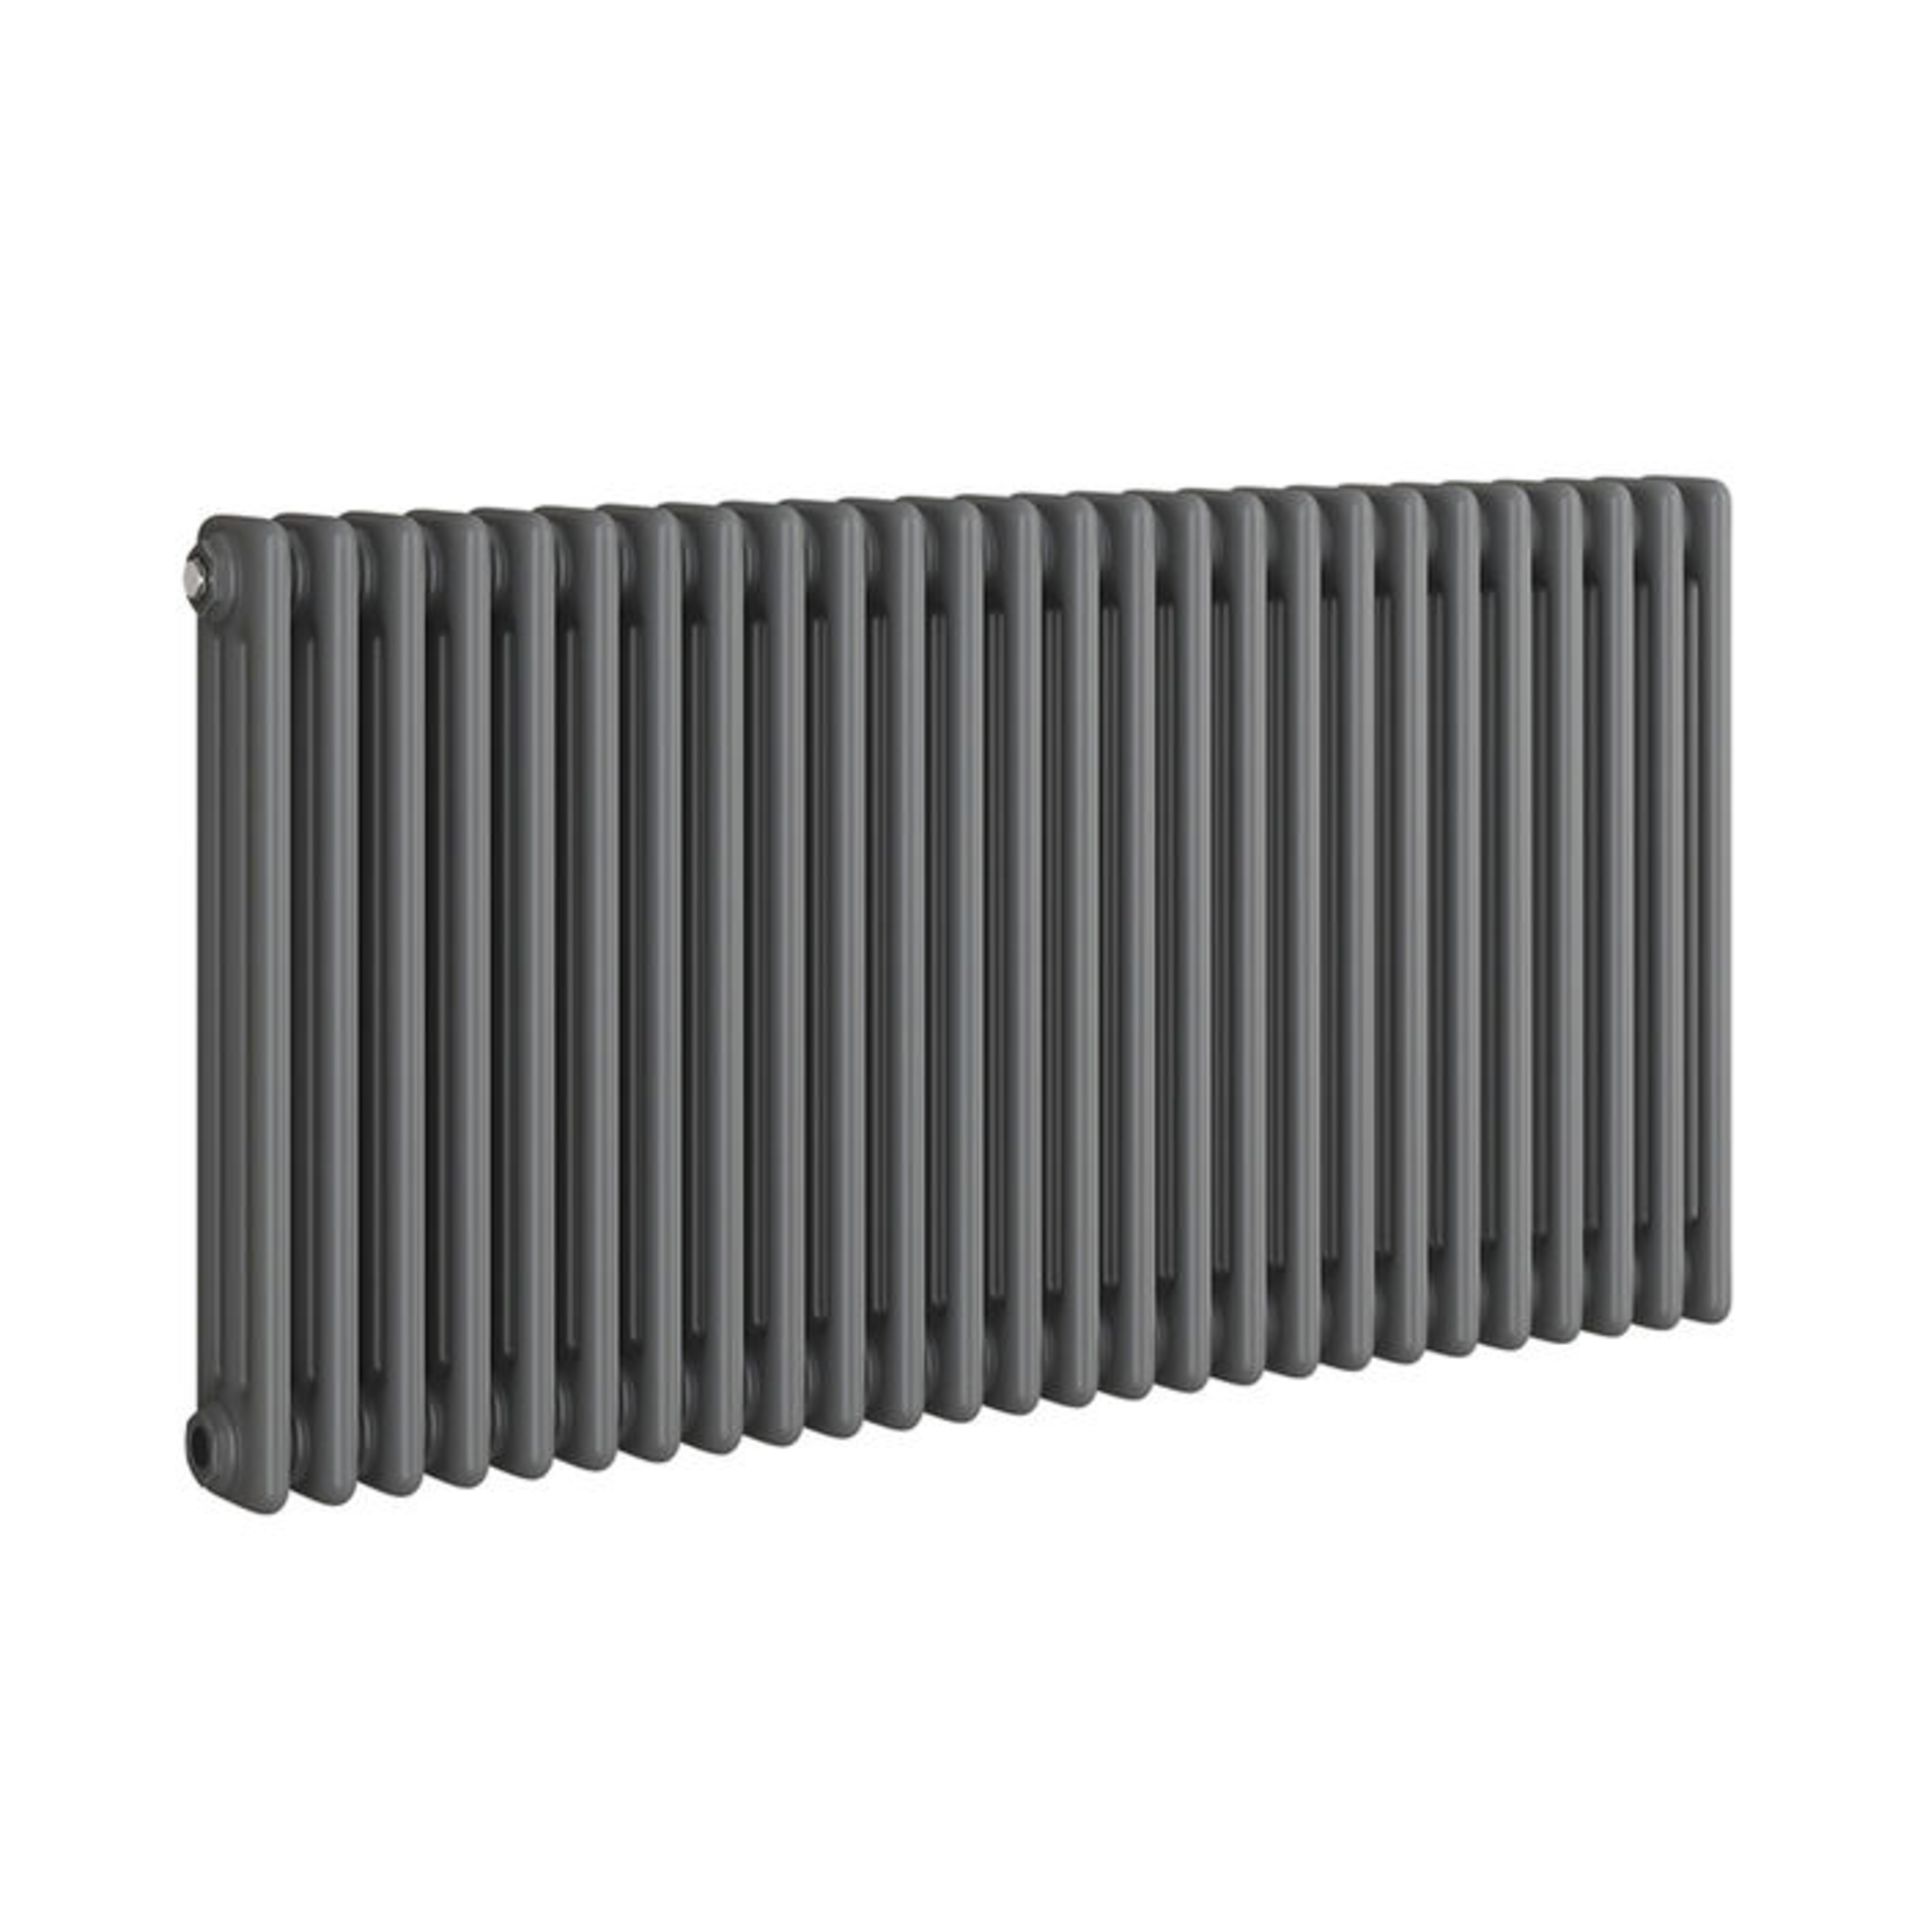 (TP34) 600x1177mm Anthracite Triple Panel Horizontal Colosseum Traditional Radiator. RRP £524.99. - Image 4 of 4